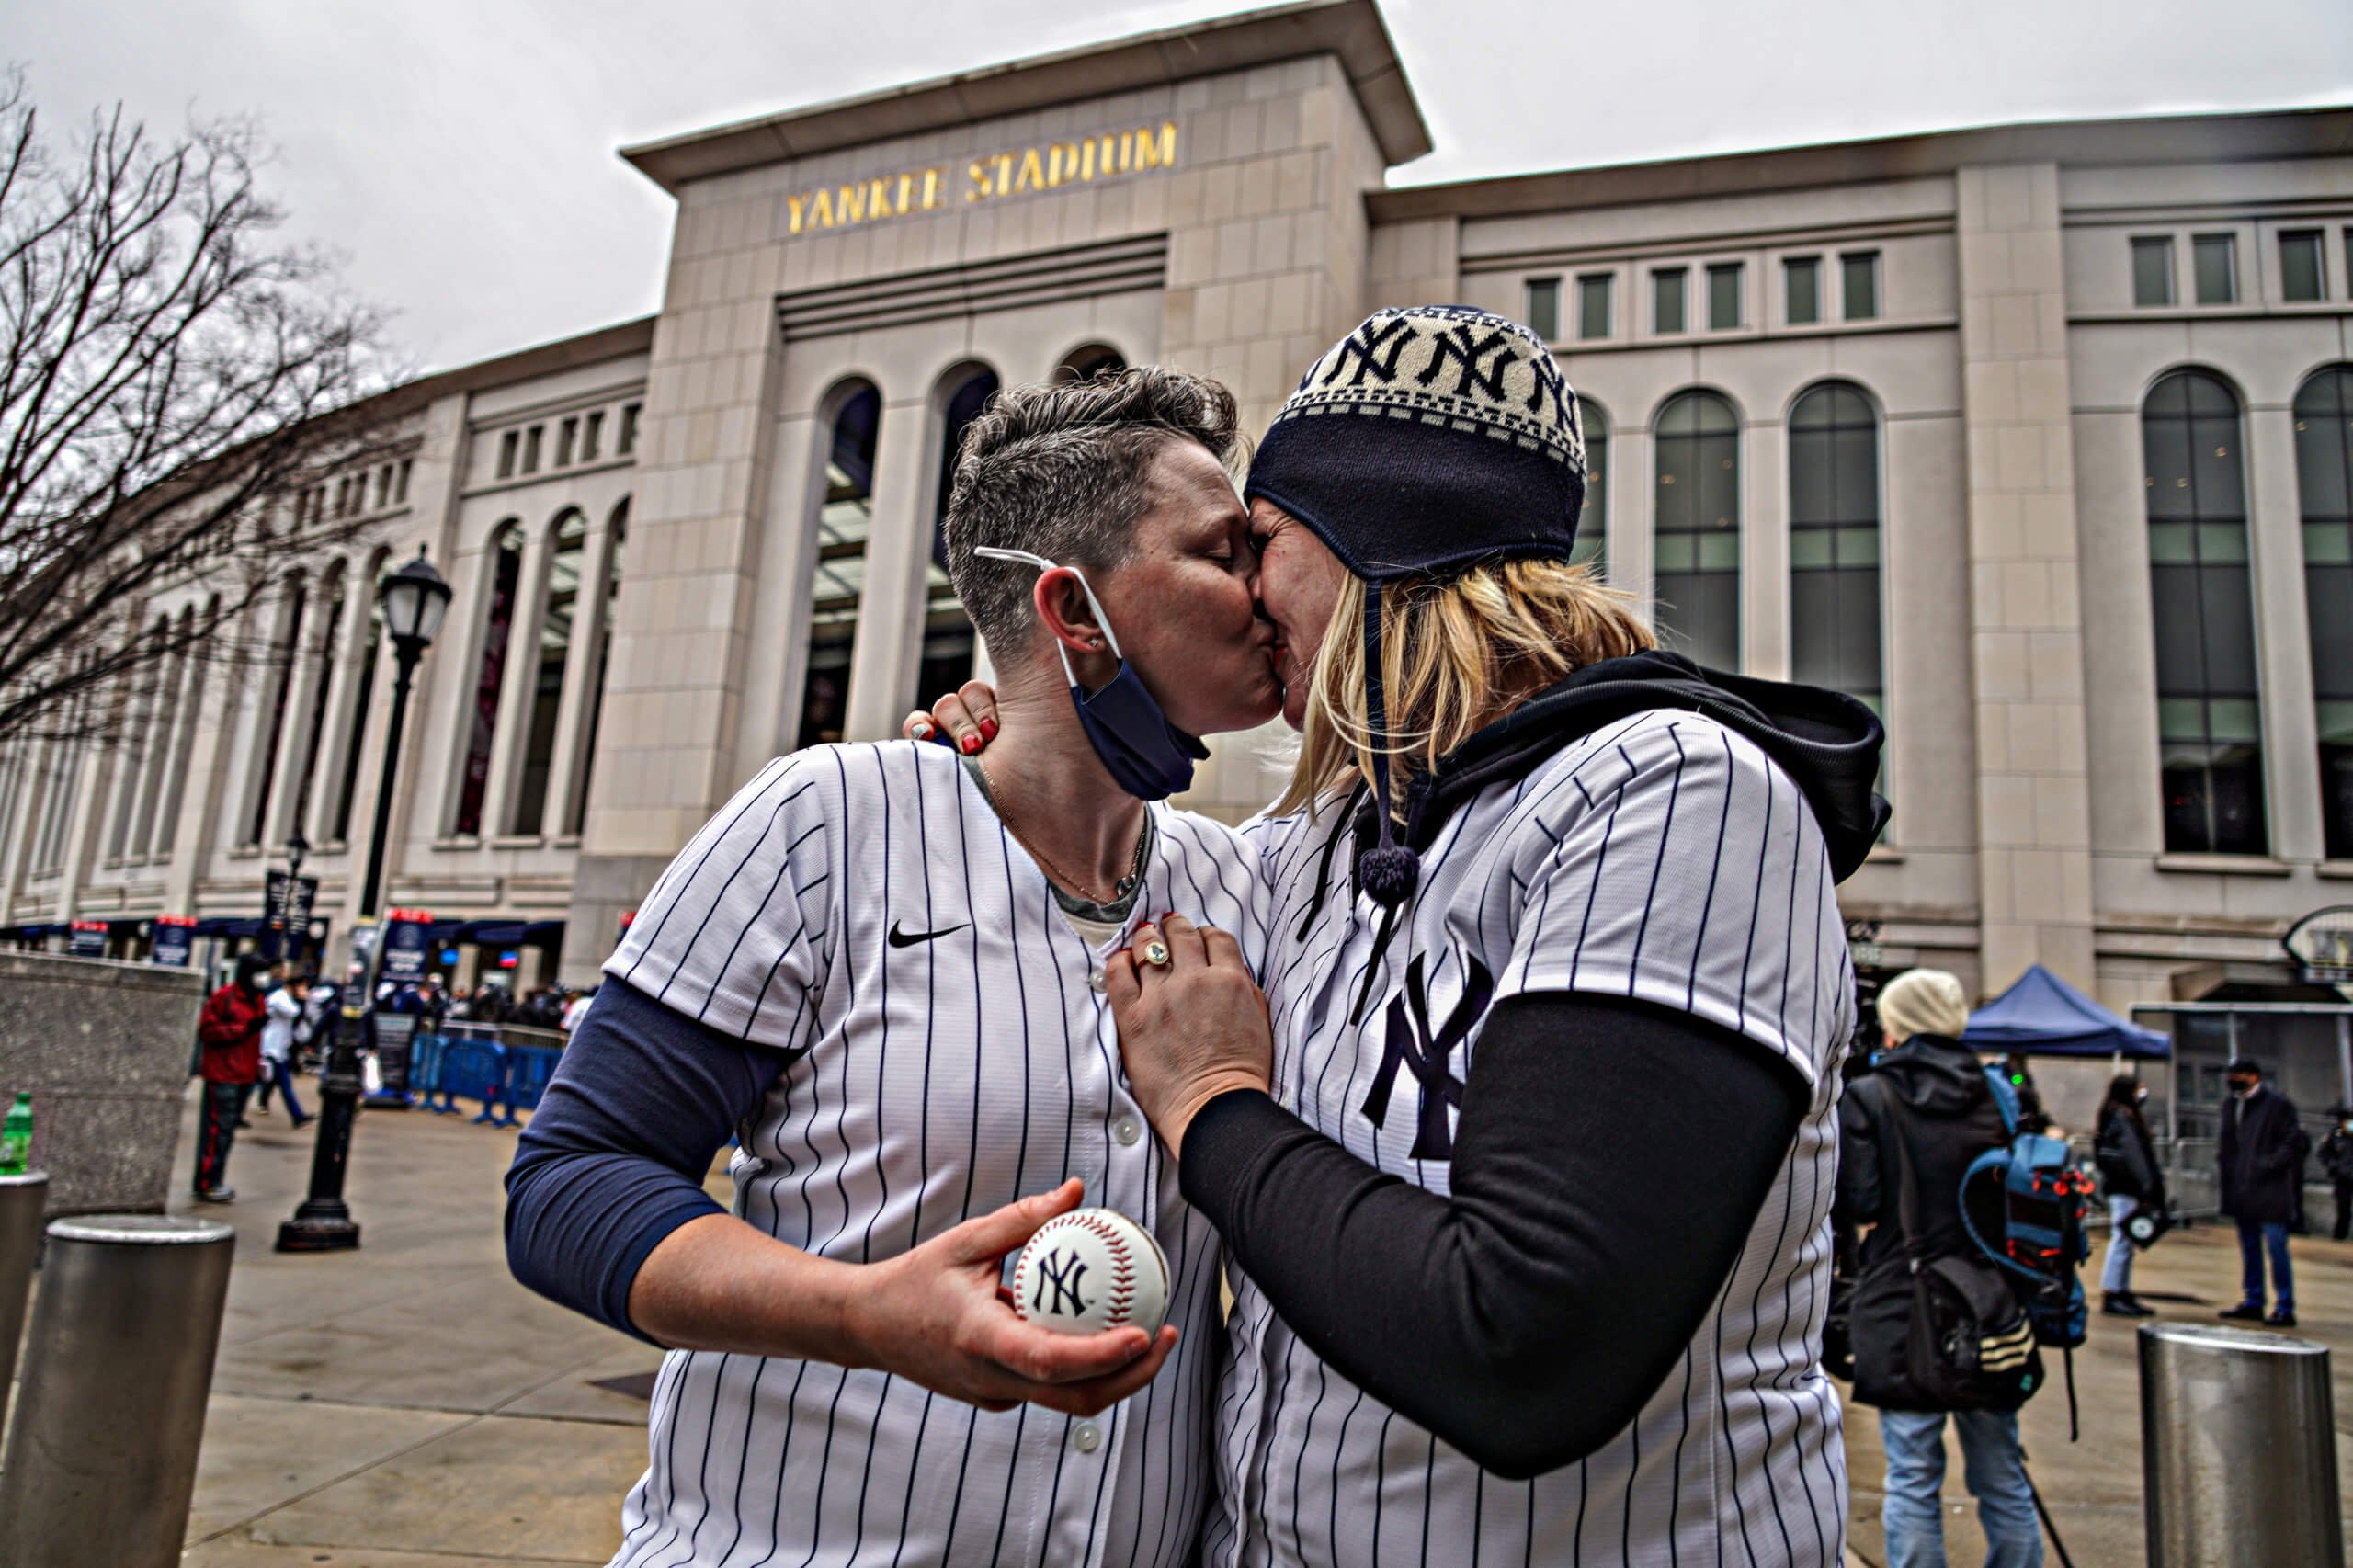 Yankee Stadium welcomes in-person crowd for Opening Day